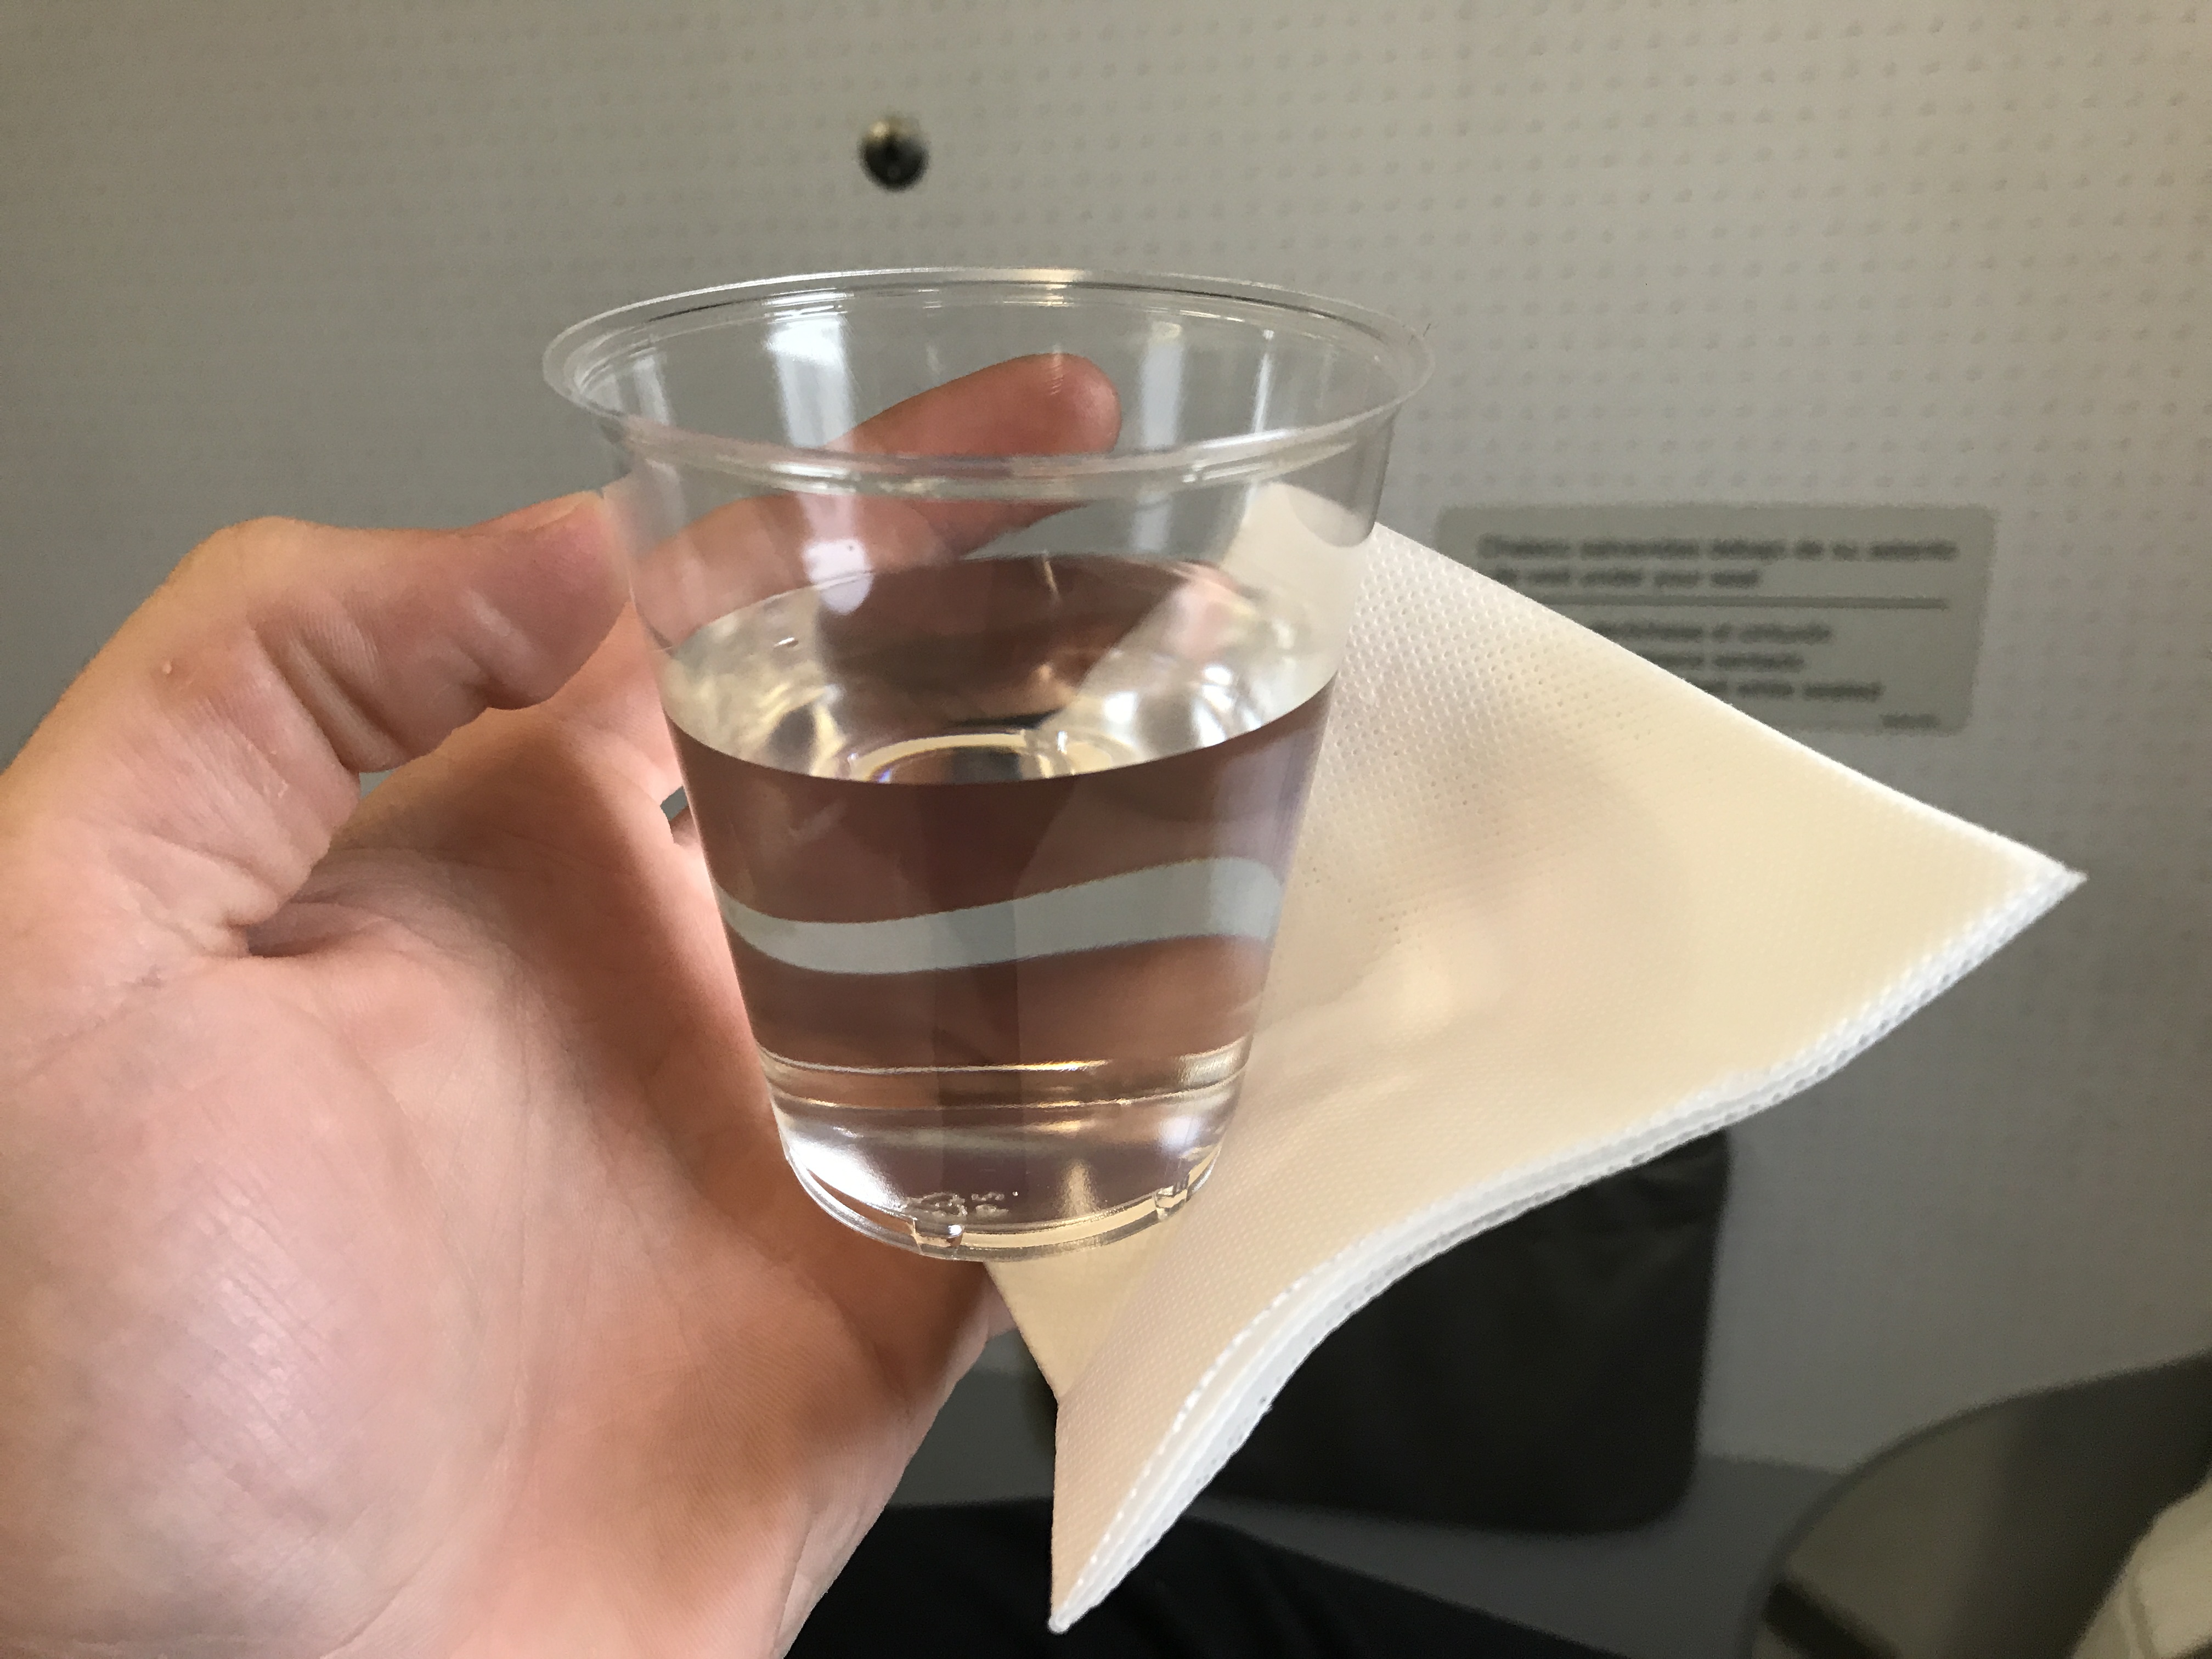 Vueling Excellence Class pre-departure water